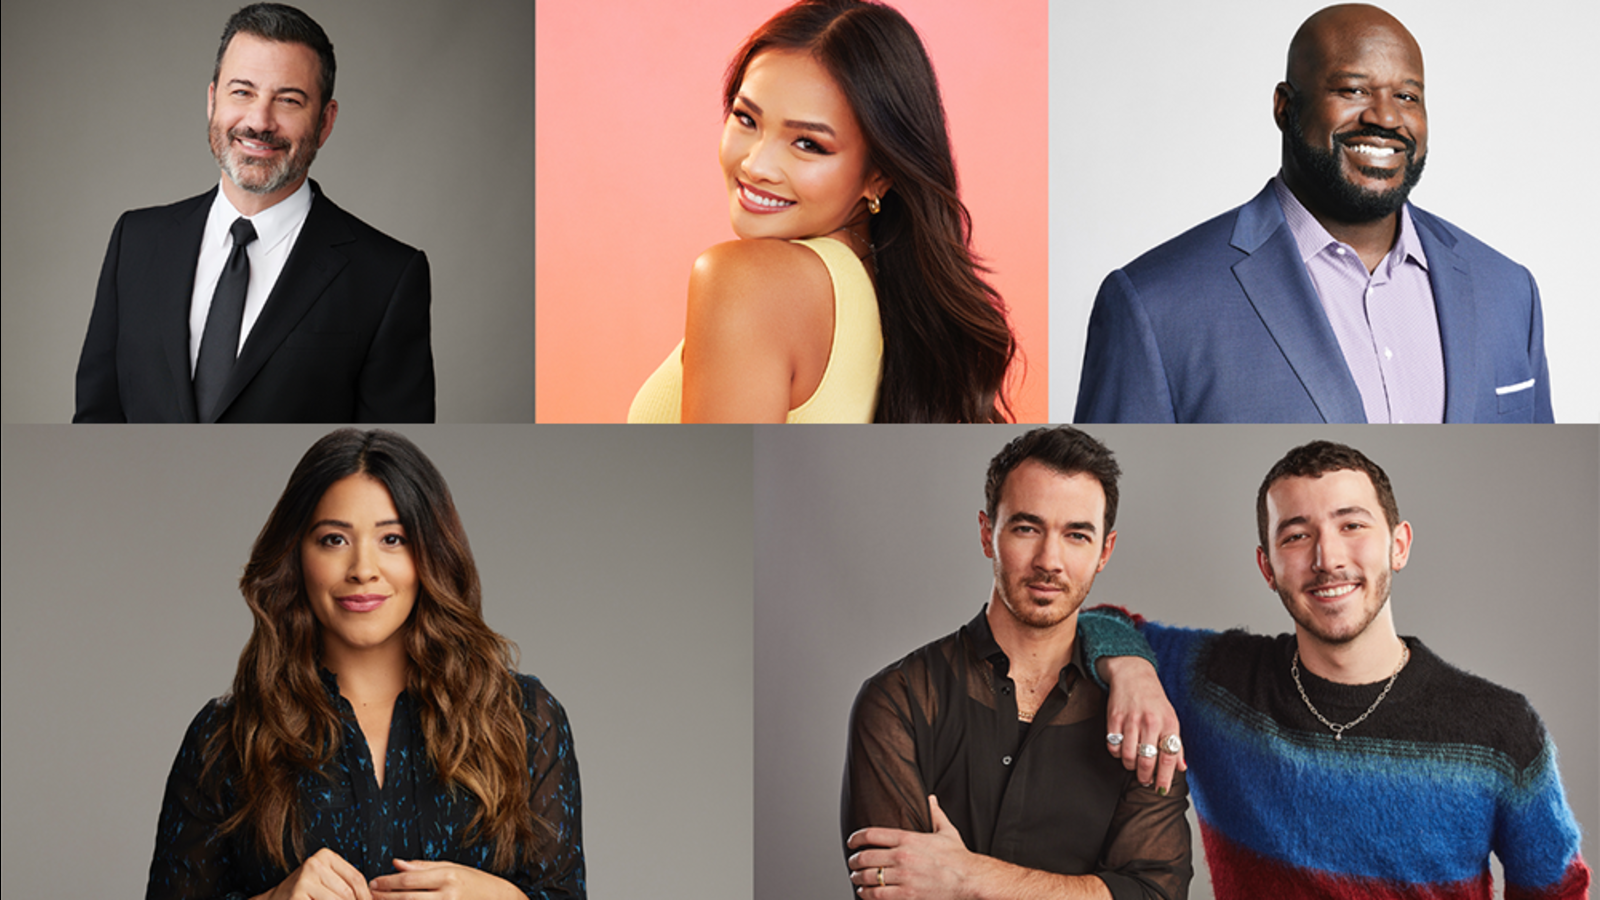 ABC summer schedule: 'The Bachelorette,' 'Claim to Fame,' 'Celebrity Family Feud' set premiere dates